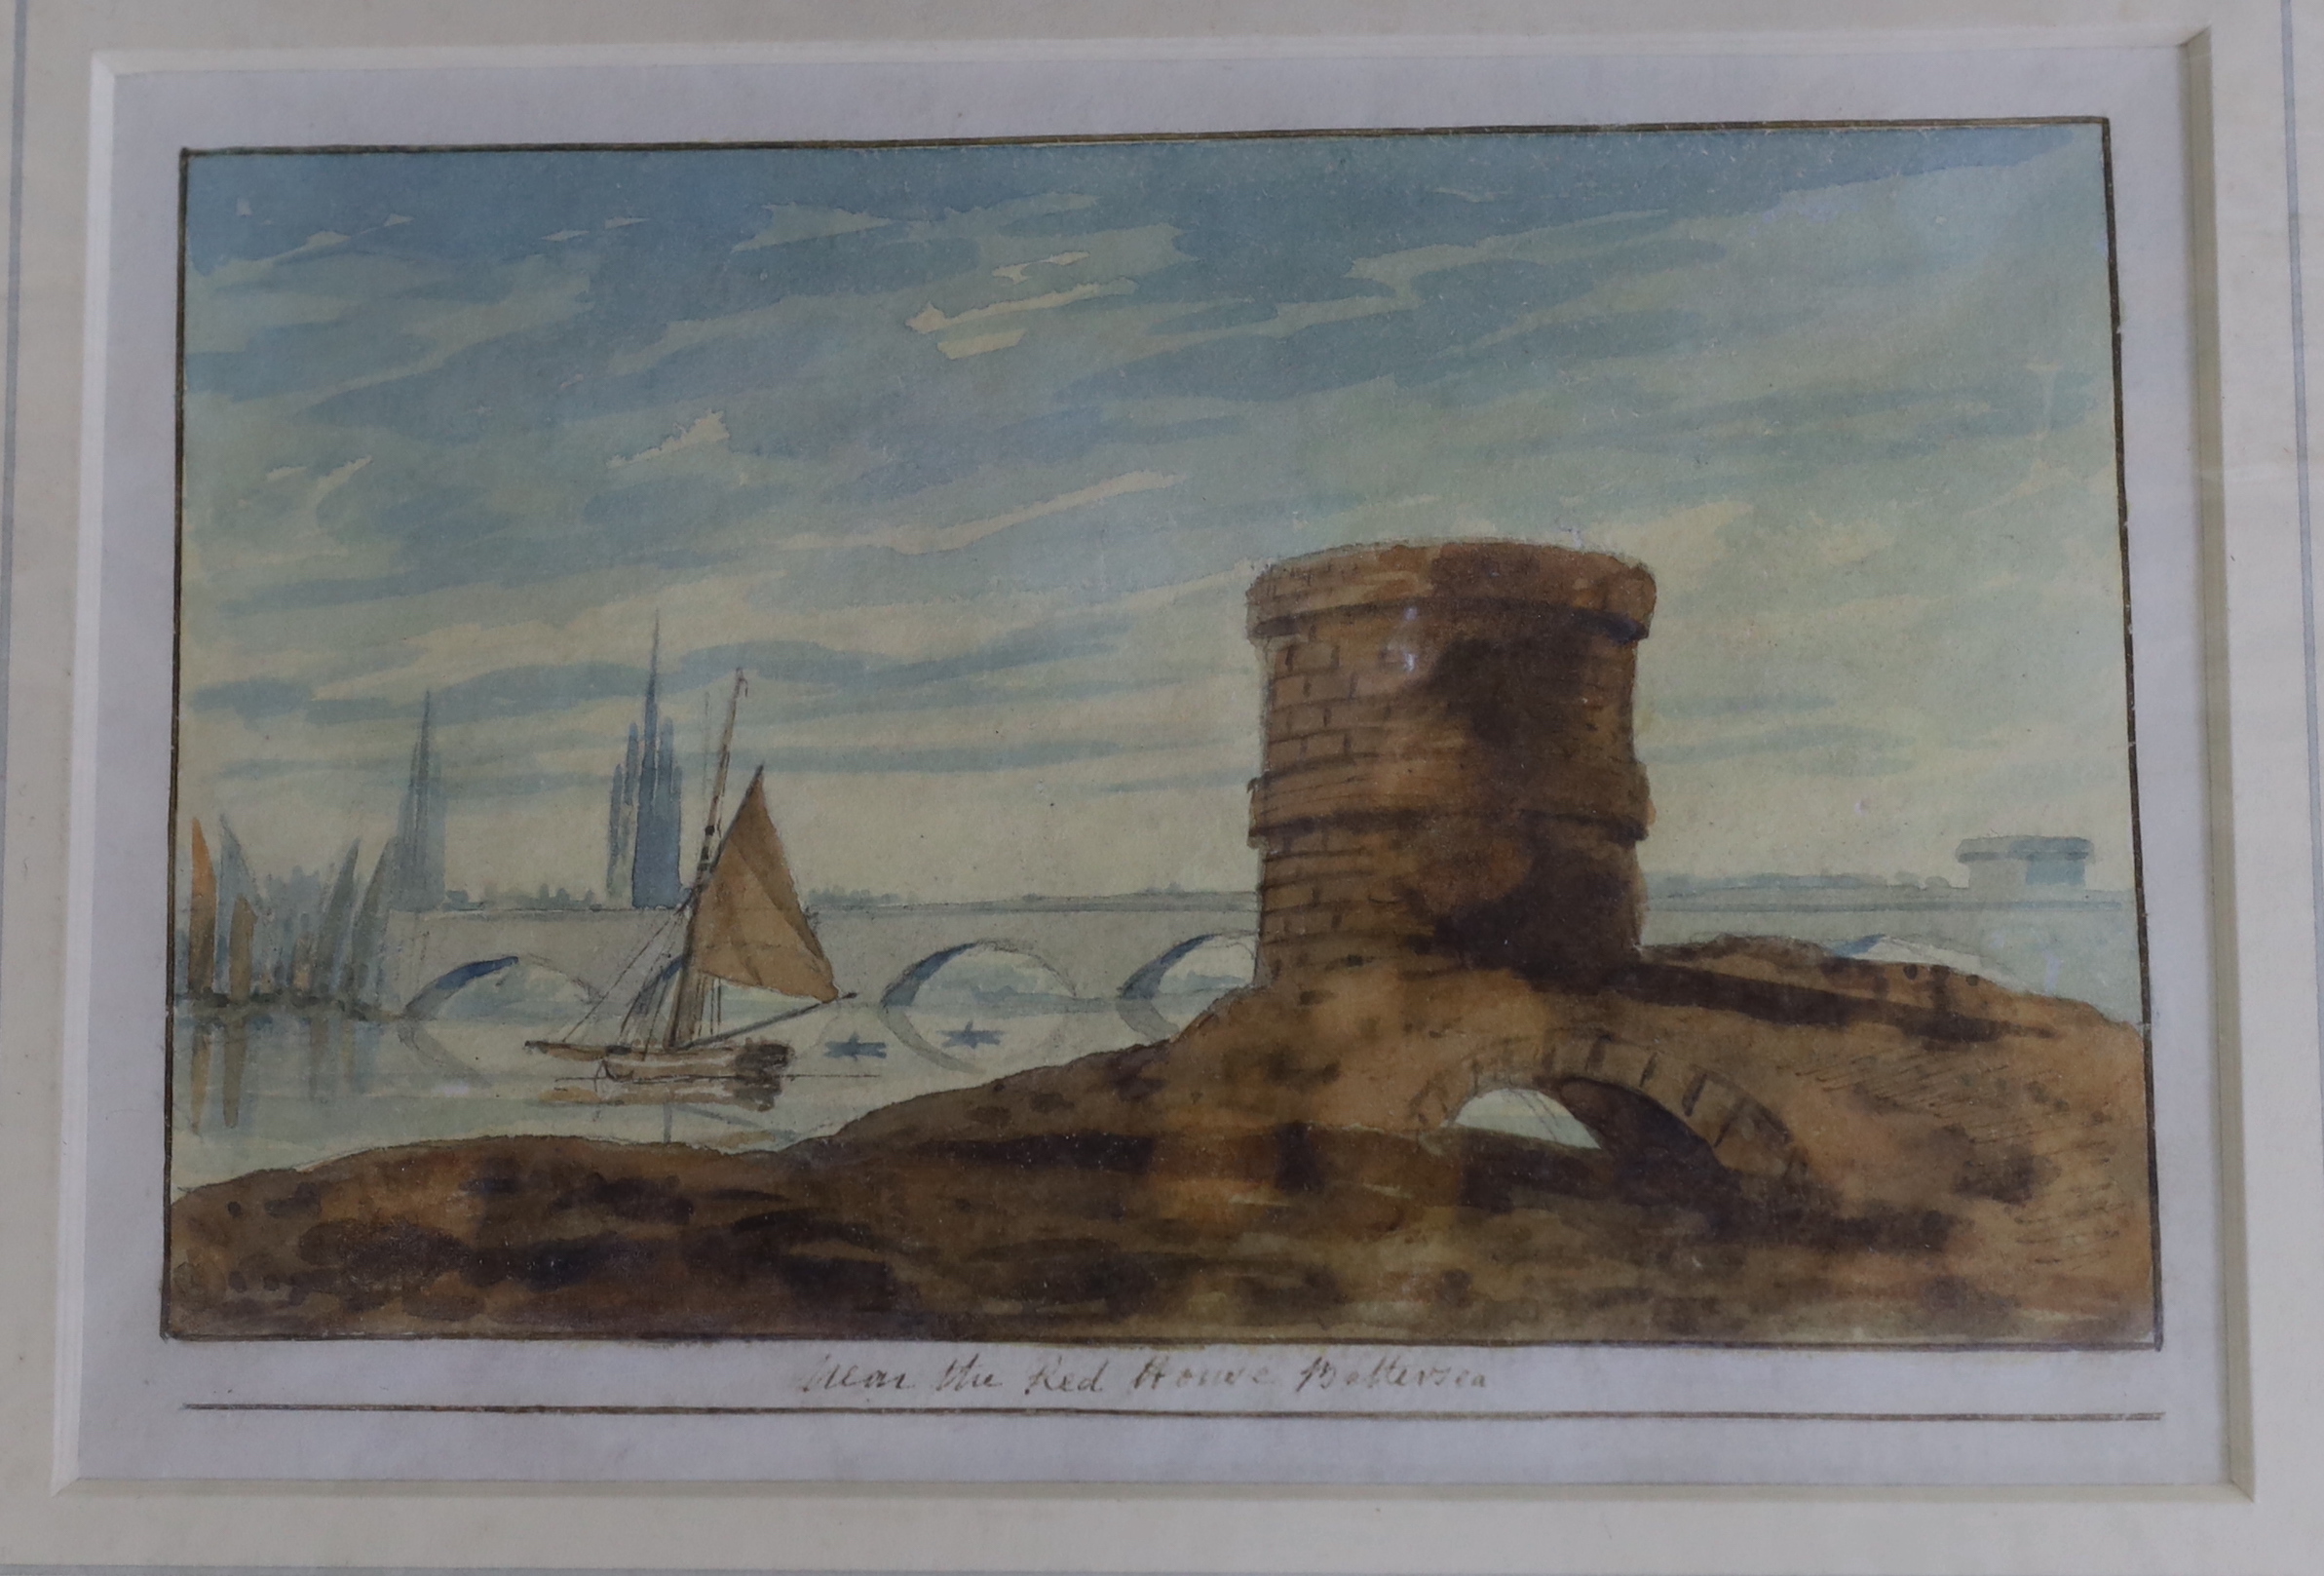 Lieutenant Edward Bampfylde Eagles (19th C.) set of three watercolours comprising, ‘Revenue Cutter’, ‘Near the Red House, Battersea’ & ‘American Schooner’, each inscribed, mounted, unframed, 10x17cm